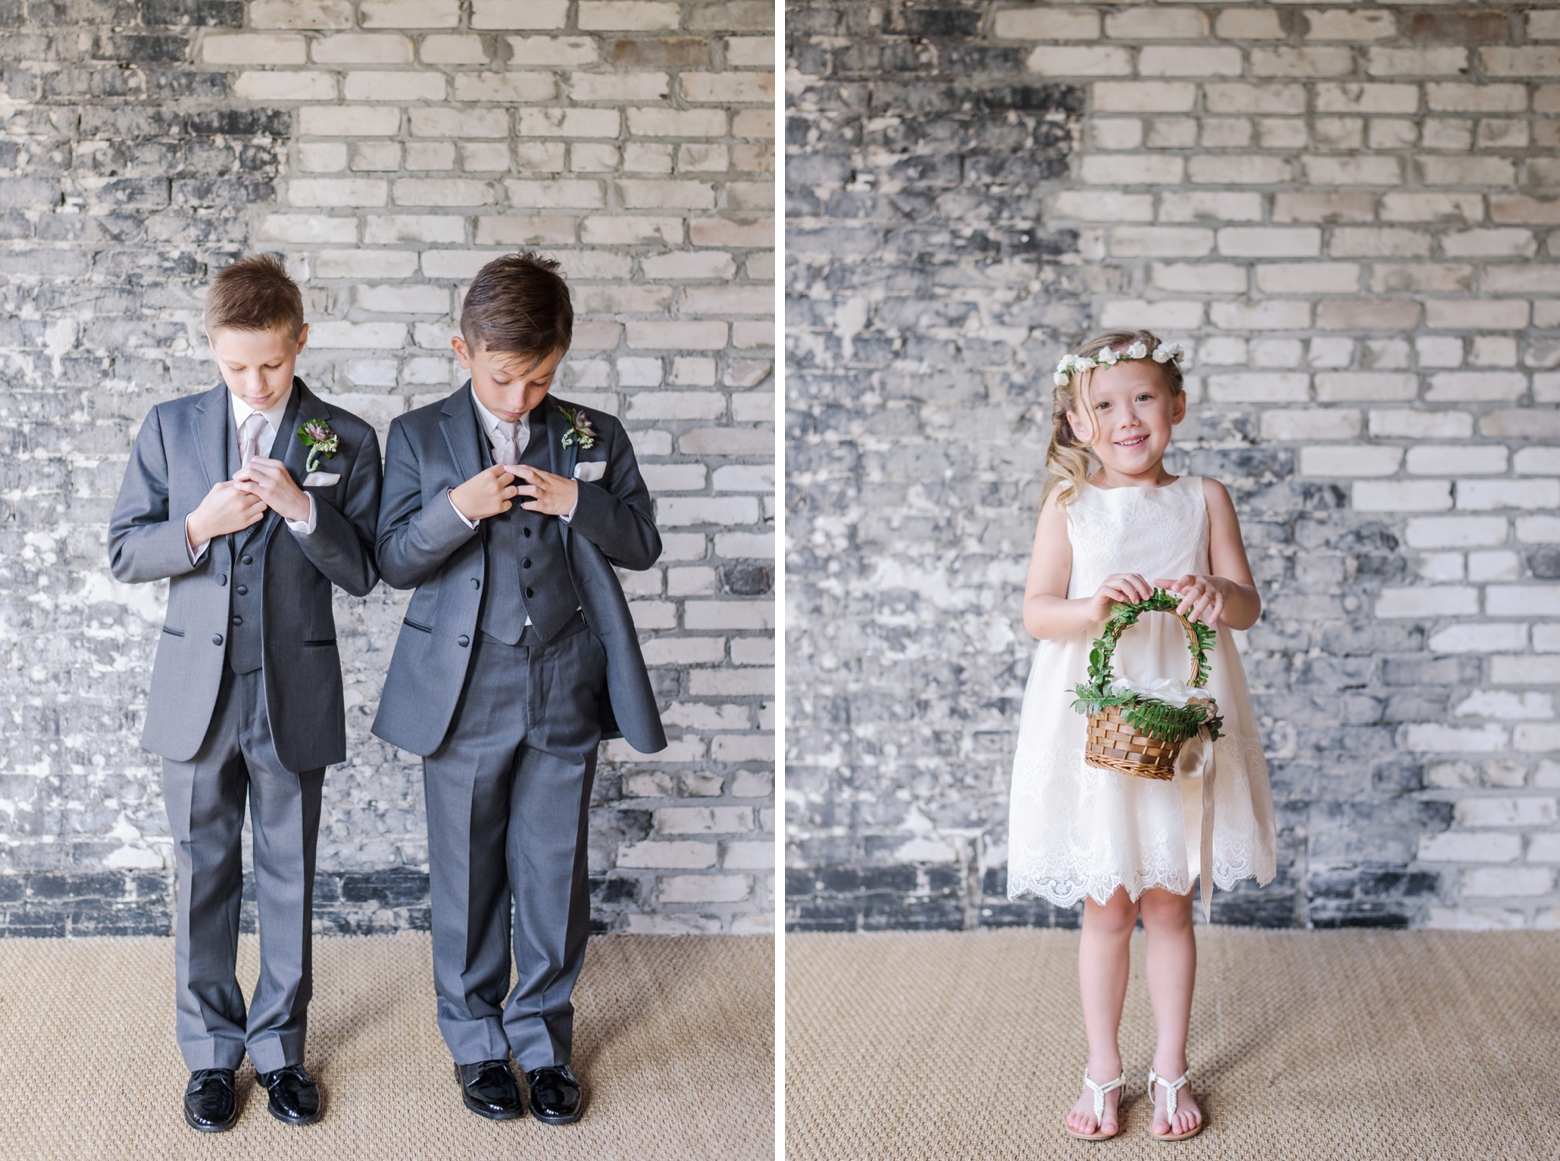 The two ring bearers and the flower girl against an old brick wall